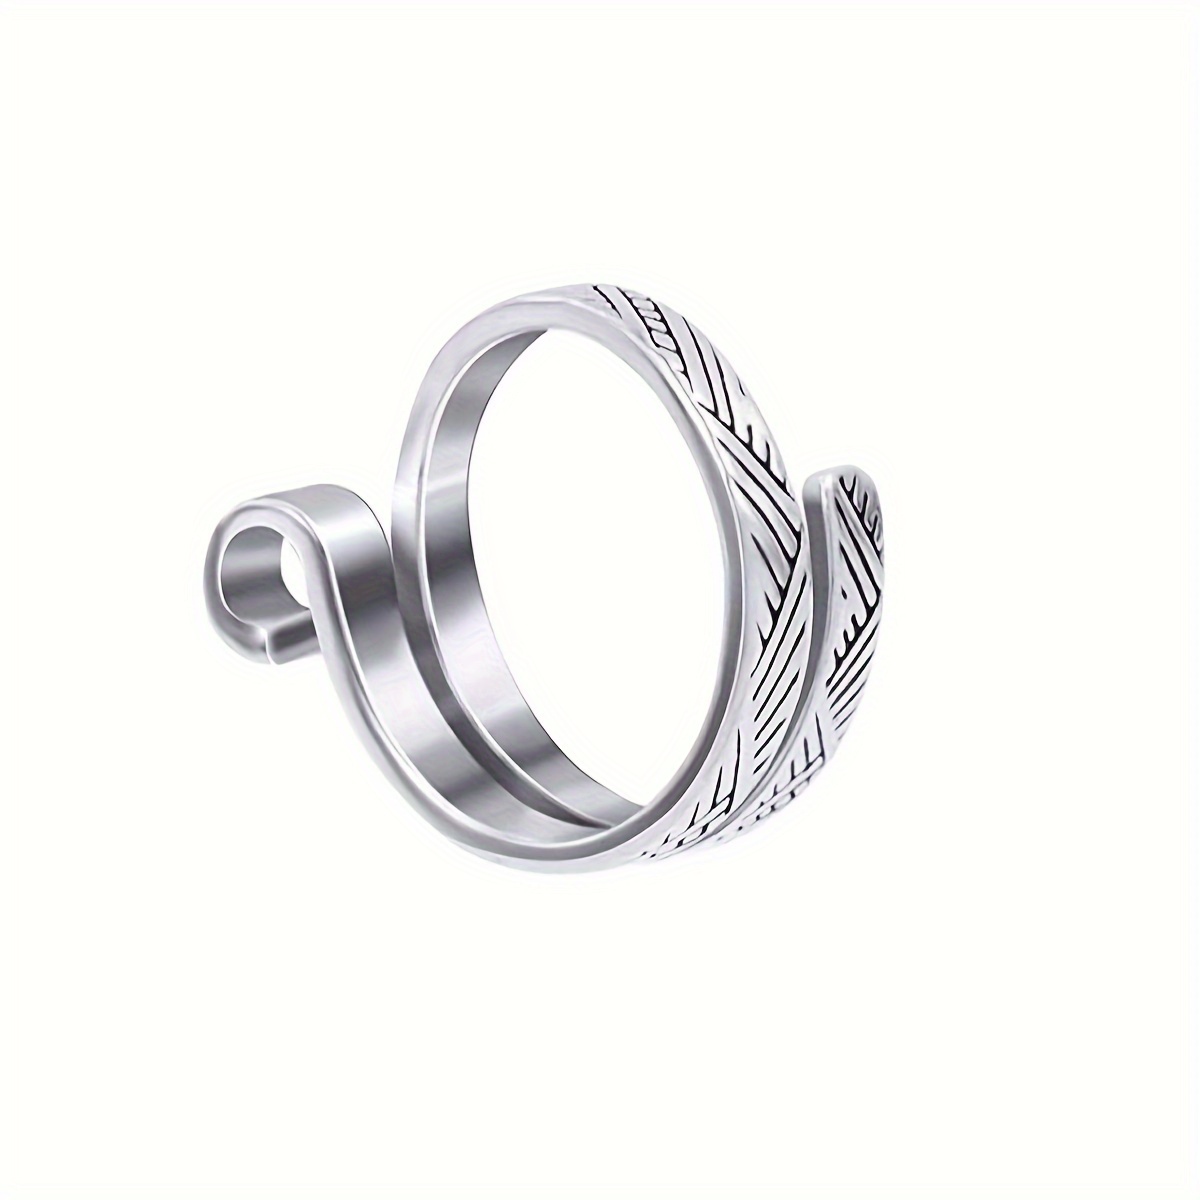 Silver Geometric Ring - Wire Crochet Statement Ring 8-9 / Silver